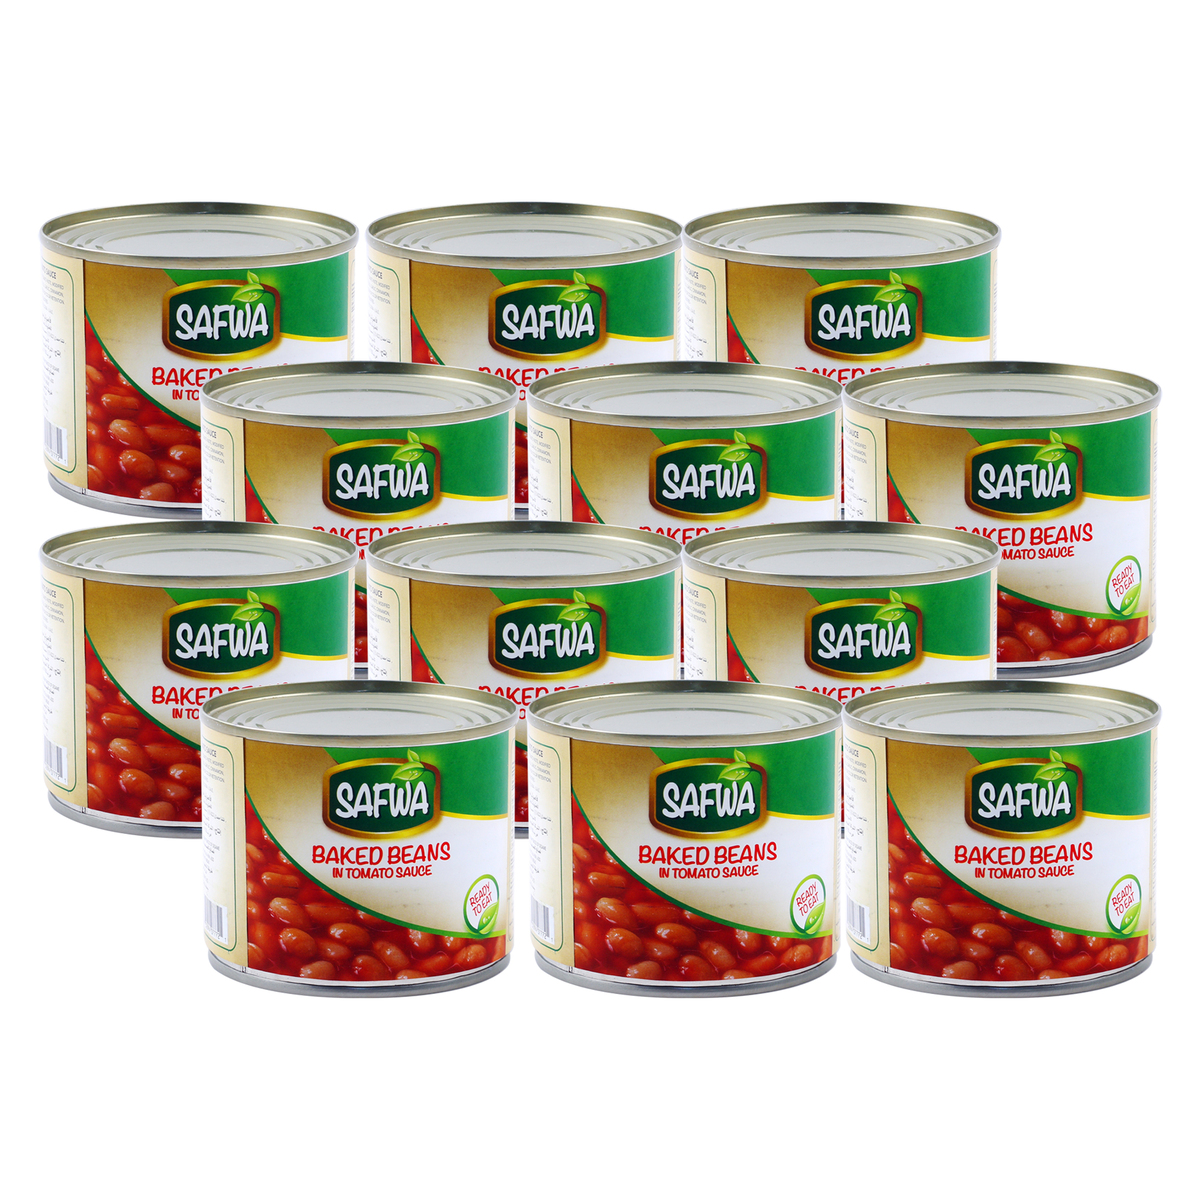 Safwa Baked Beans in Tomato Sauce 12 x 220g